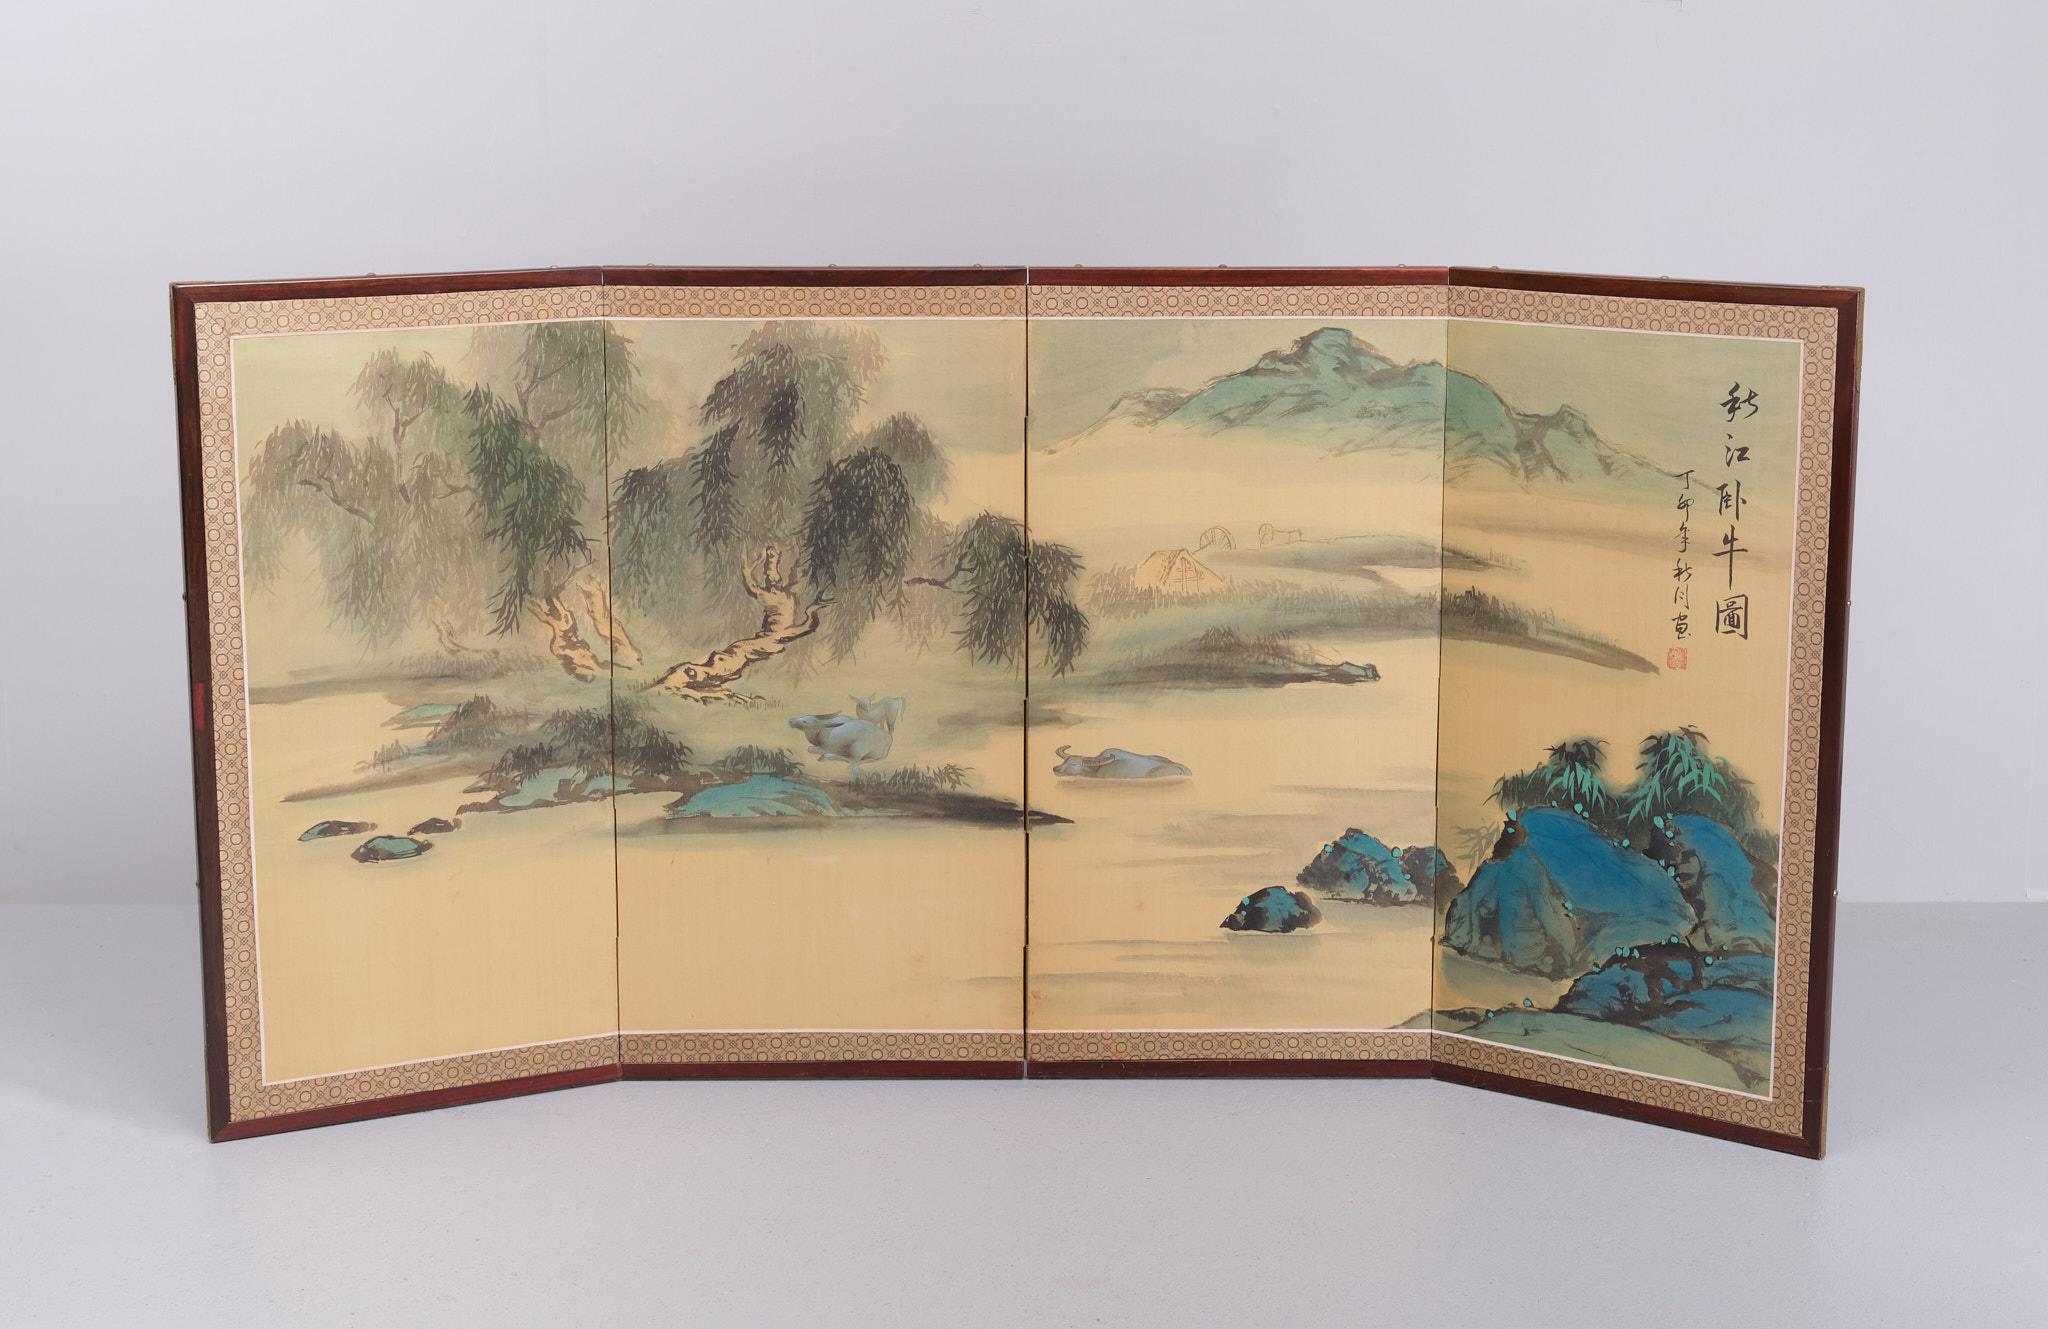 very nice 4 piece folding table screen .Japan  Watercolor ,landscape 
with some buffalo s en houses . signed  .Nice bright colors .